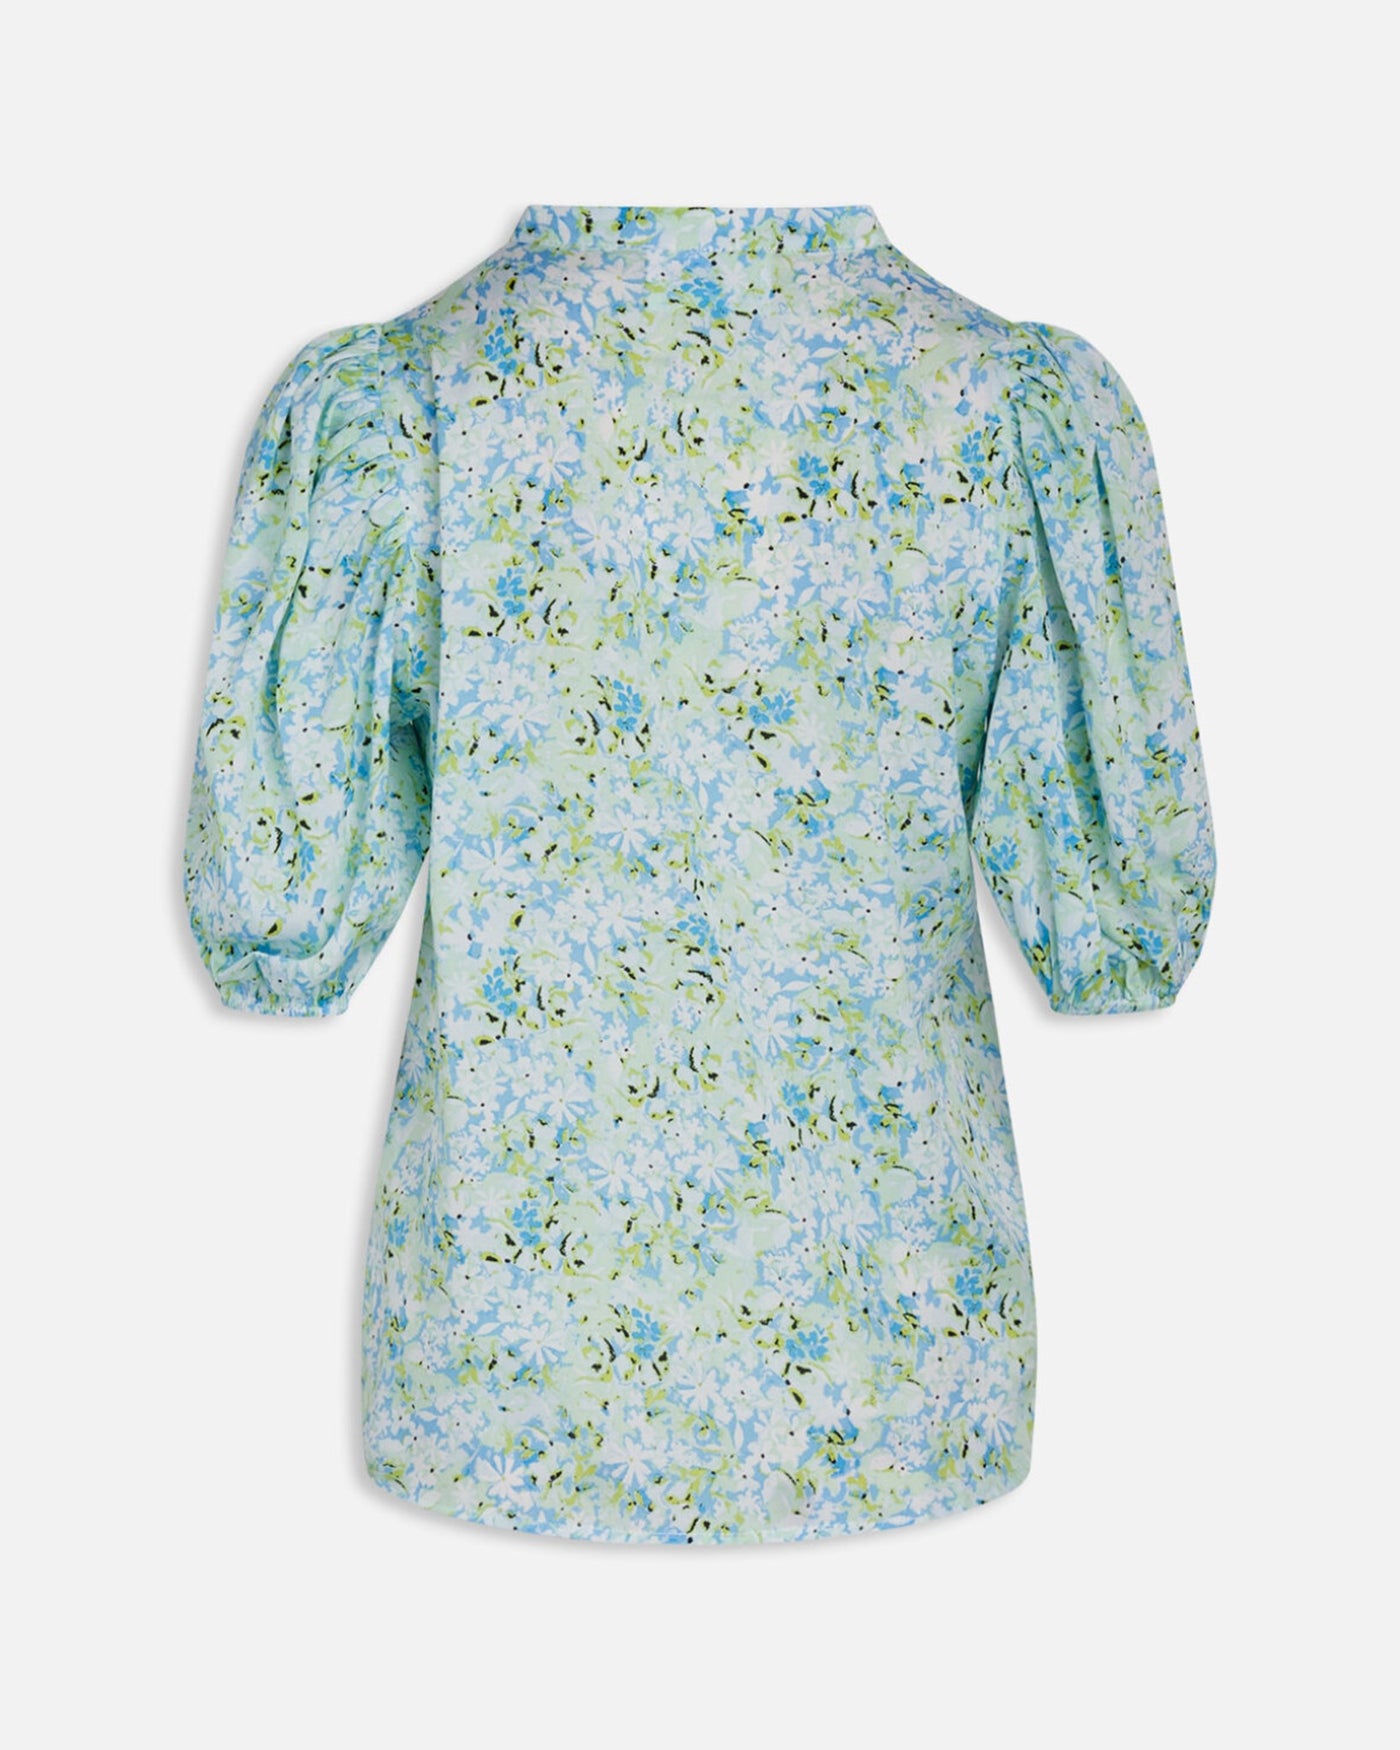 Varia Bluse - Blue/Green Flower - Sisters Point 4